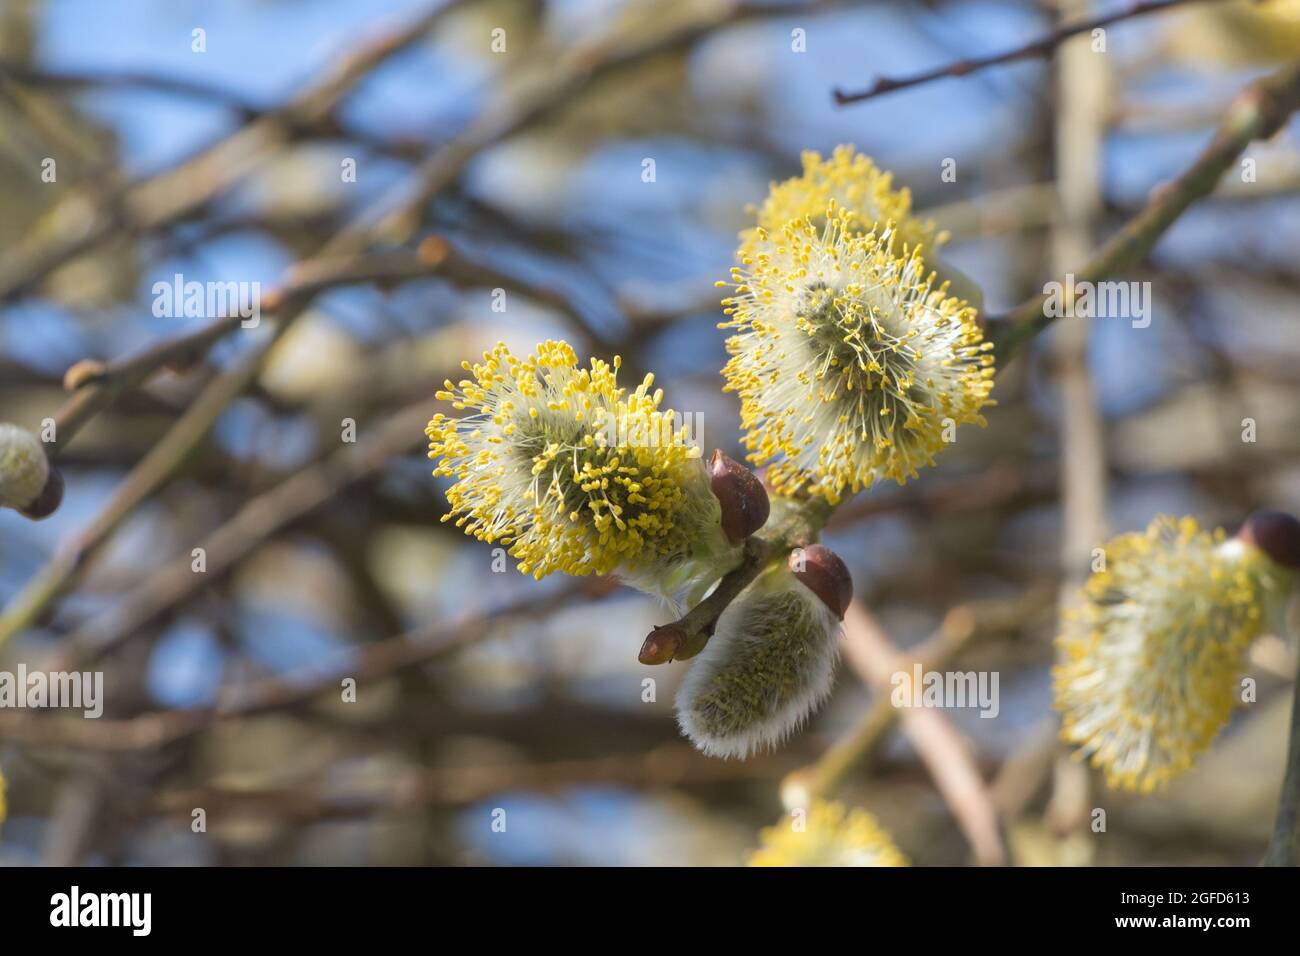 Catkins of goat willow in a garden during winter Stock Photo